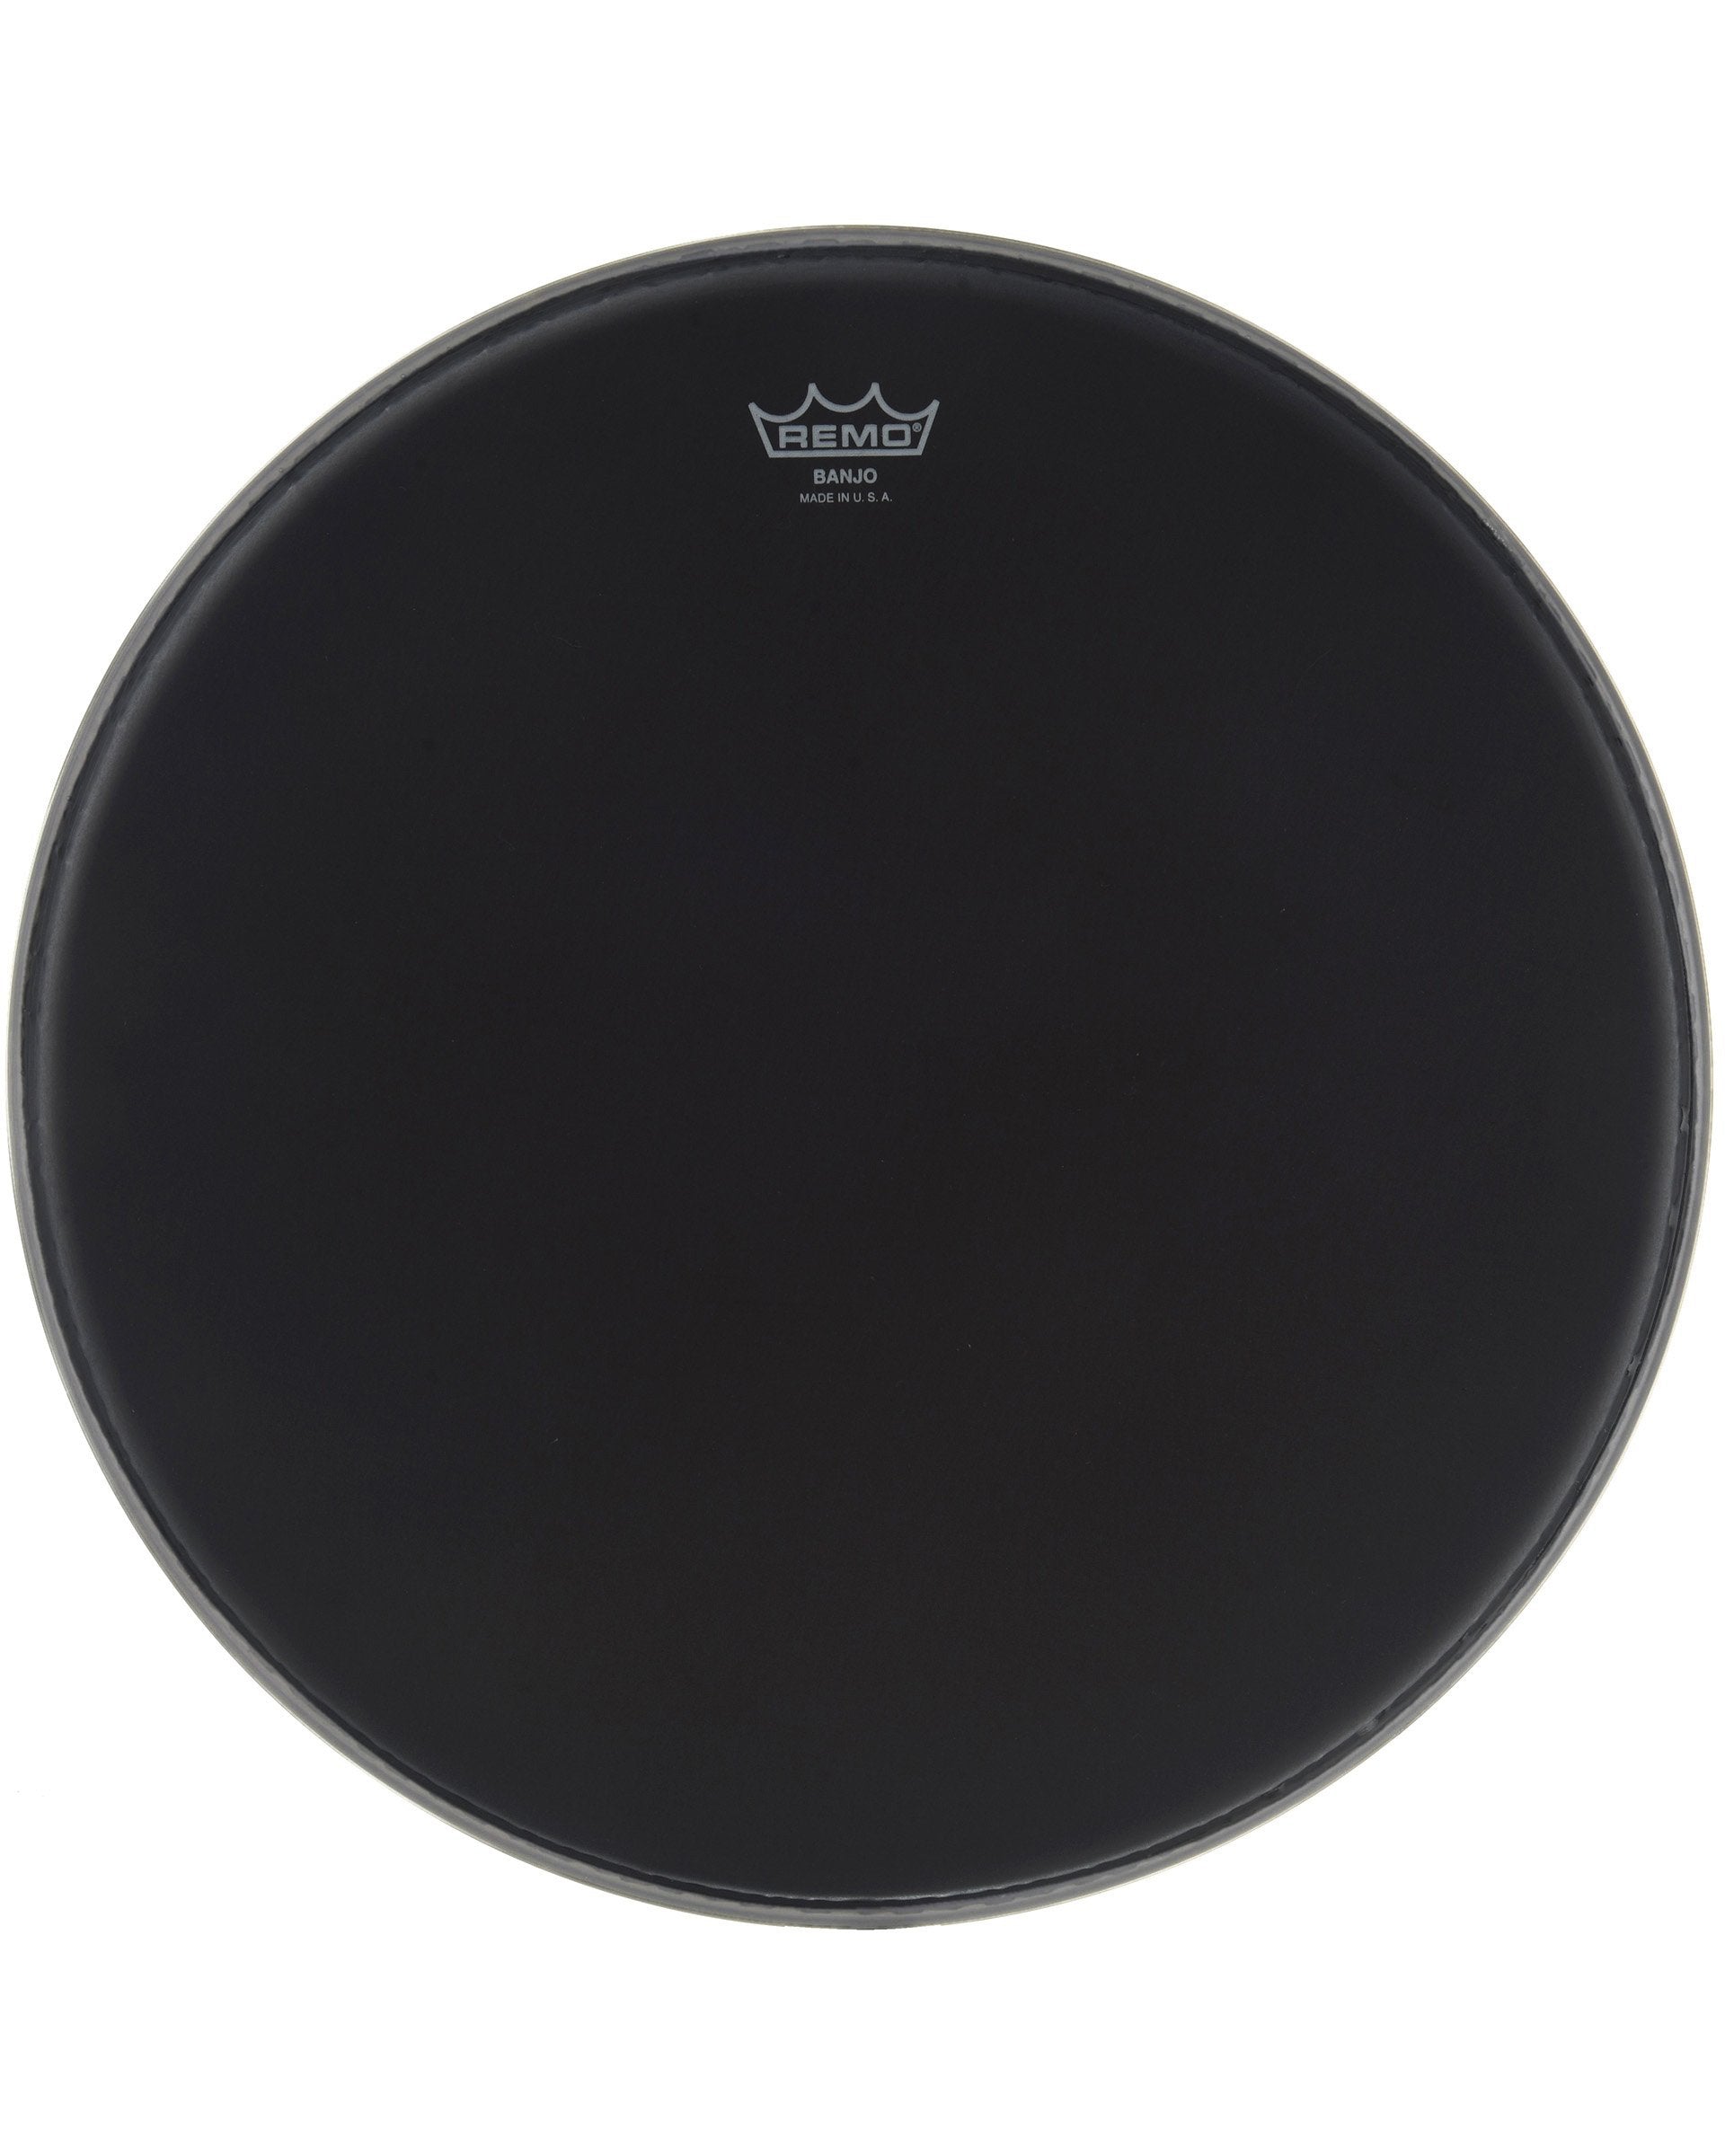 Image 1 of Remo Black Suede Banjo Head, 11 Inch Diameter, High Crown (1/2 Inch) - SKU# B1100-H-BKSUEDE : Product Type Accessories & Parts : Elderly Instruments